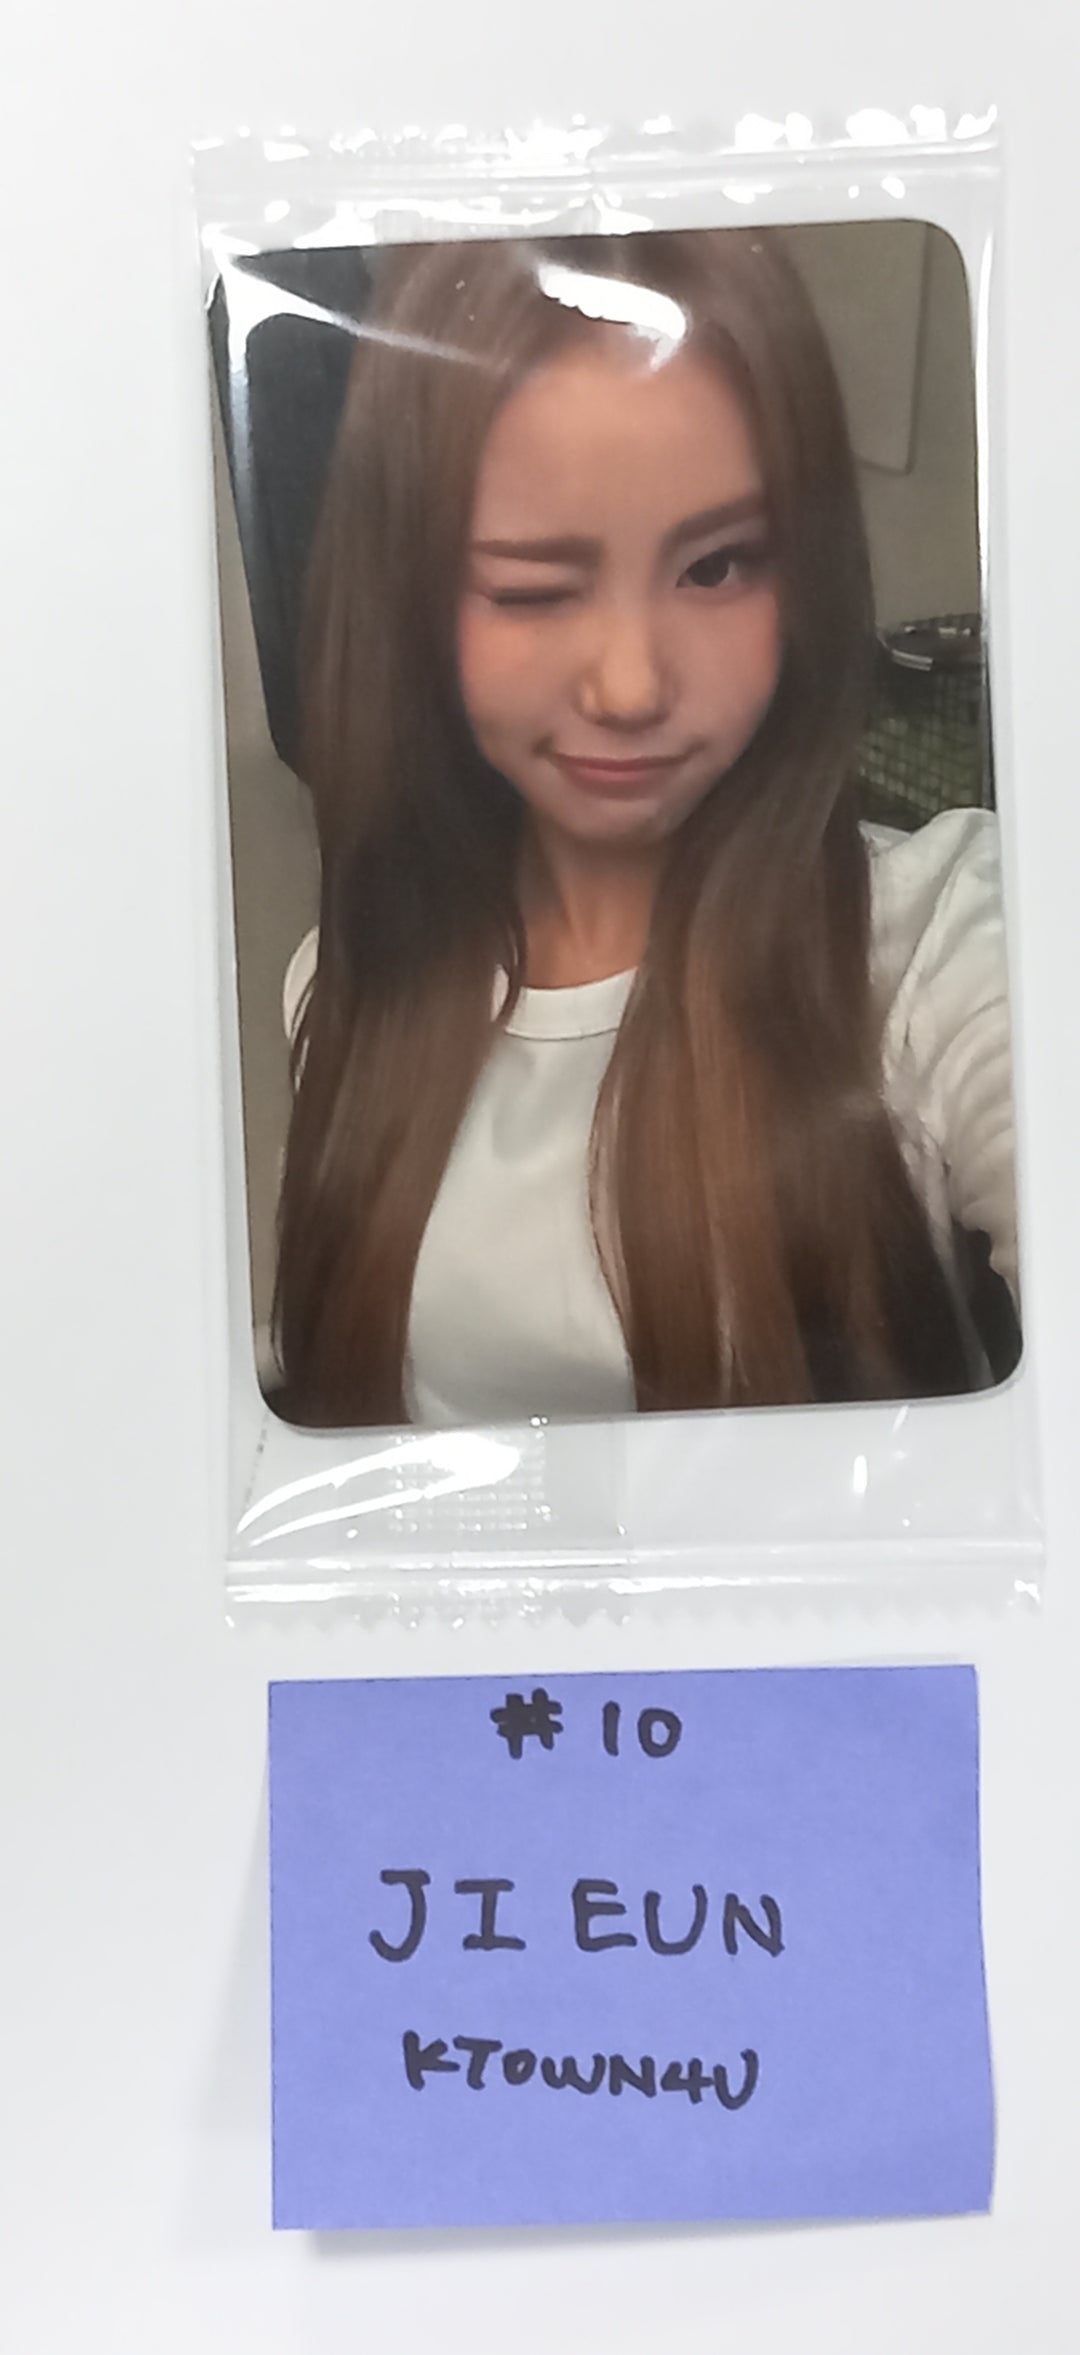 YOUNG POSSE "MACARONI CHEESE" - Ktown4U Fansign Event Photocard [23.10.23]